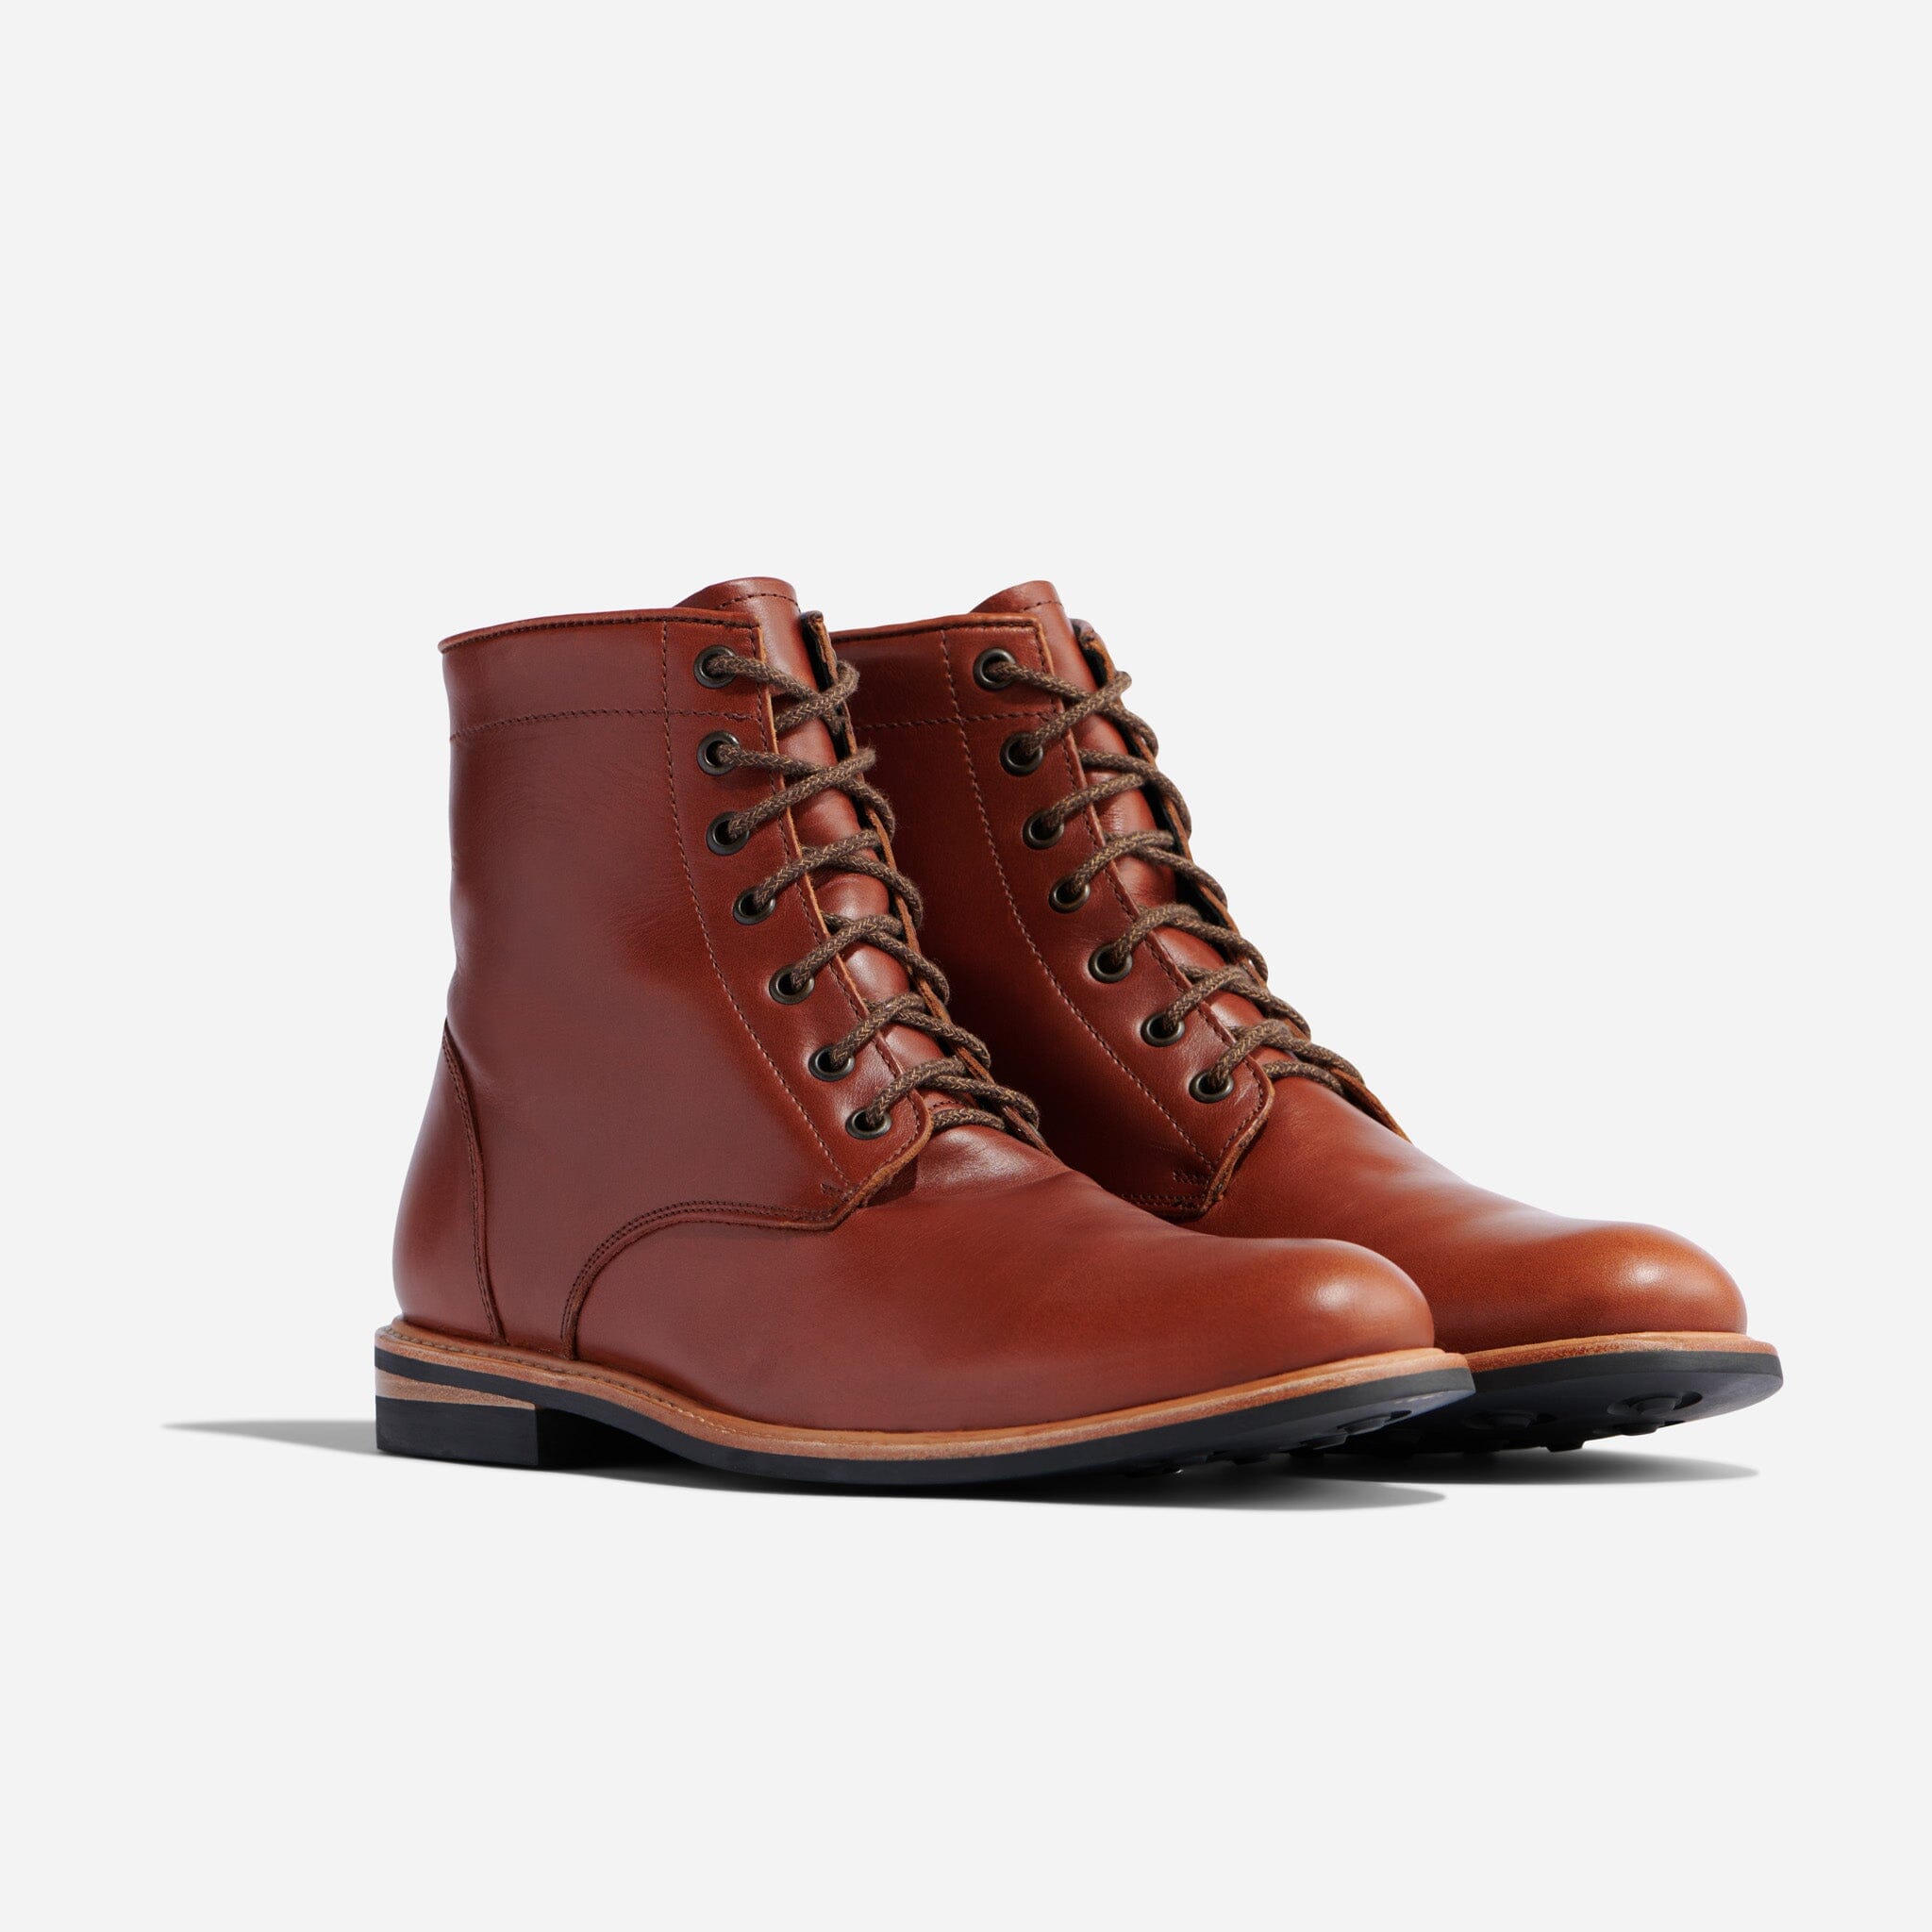 Men's All Weather Boot, Ethically Made